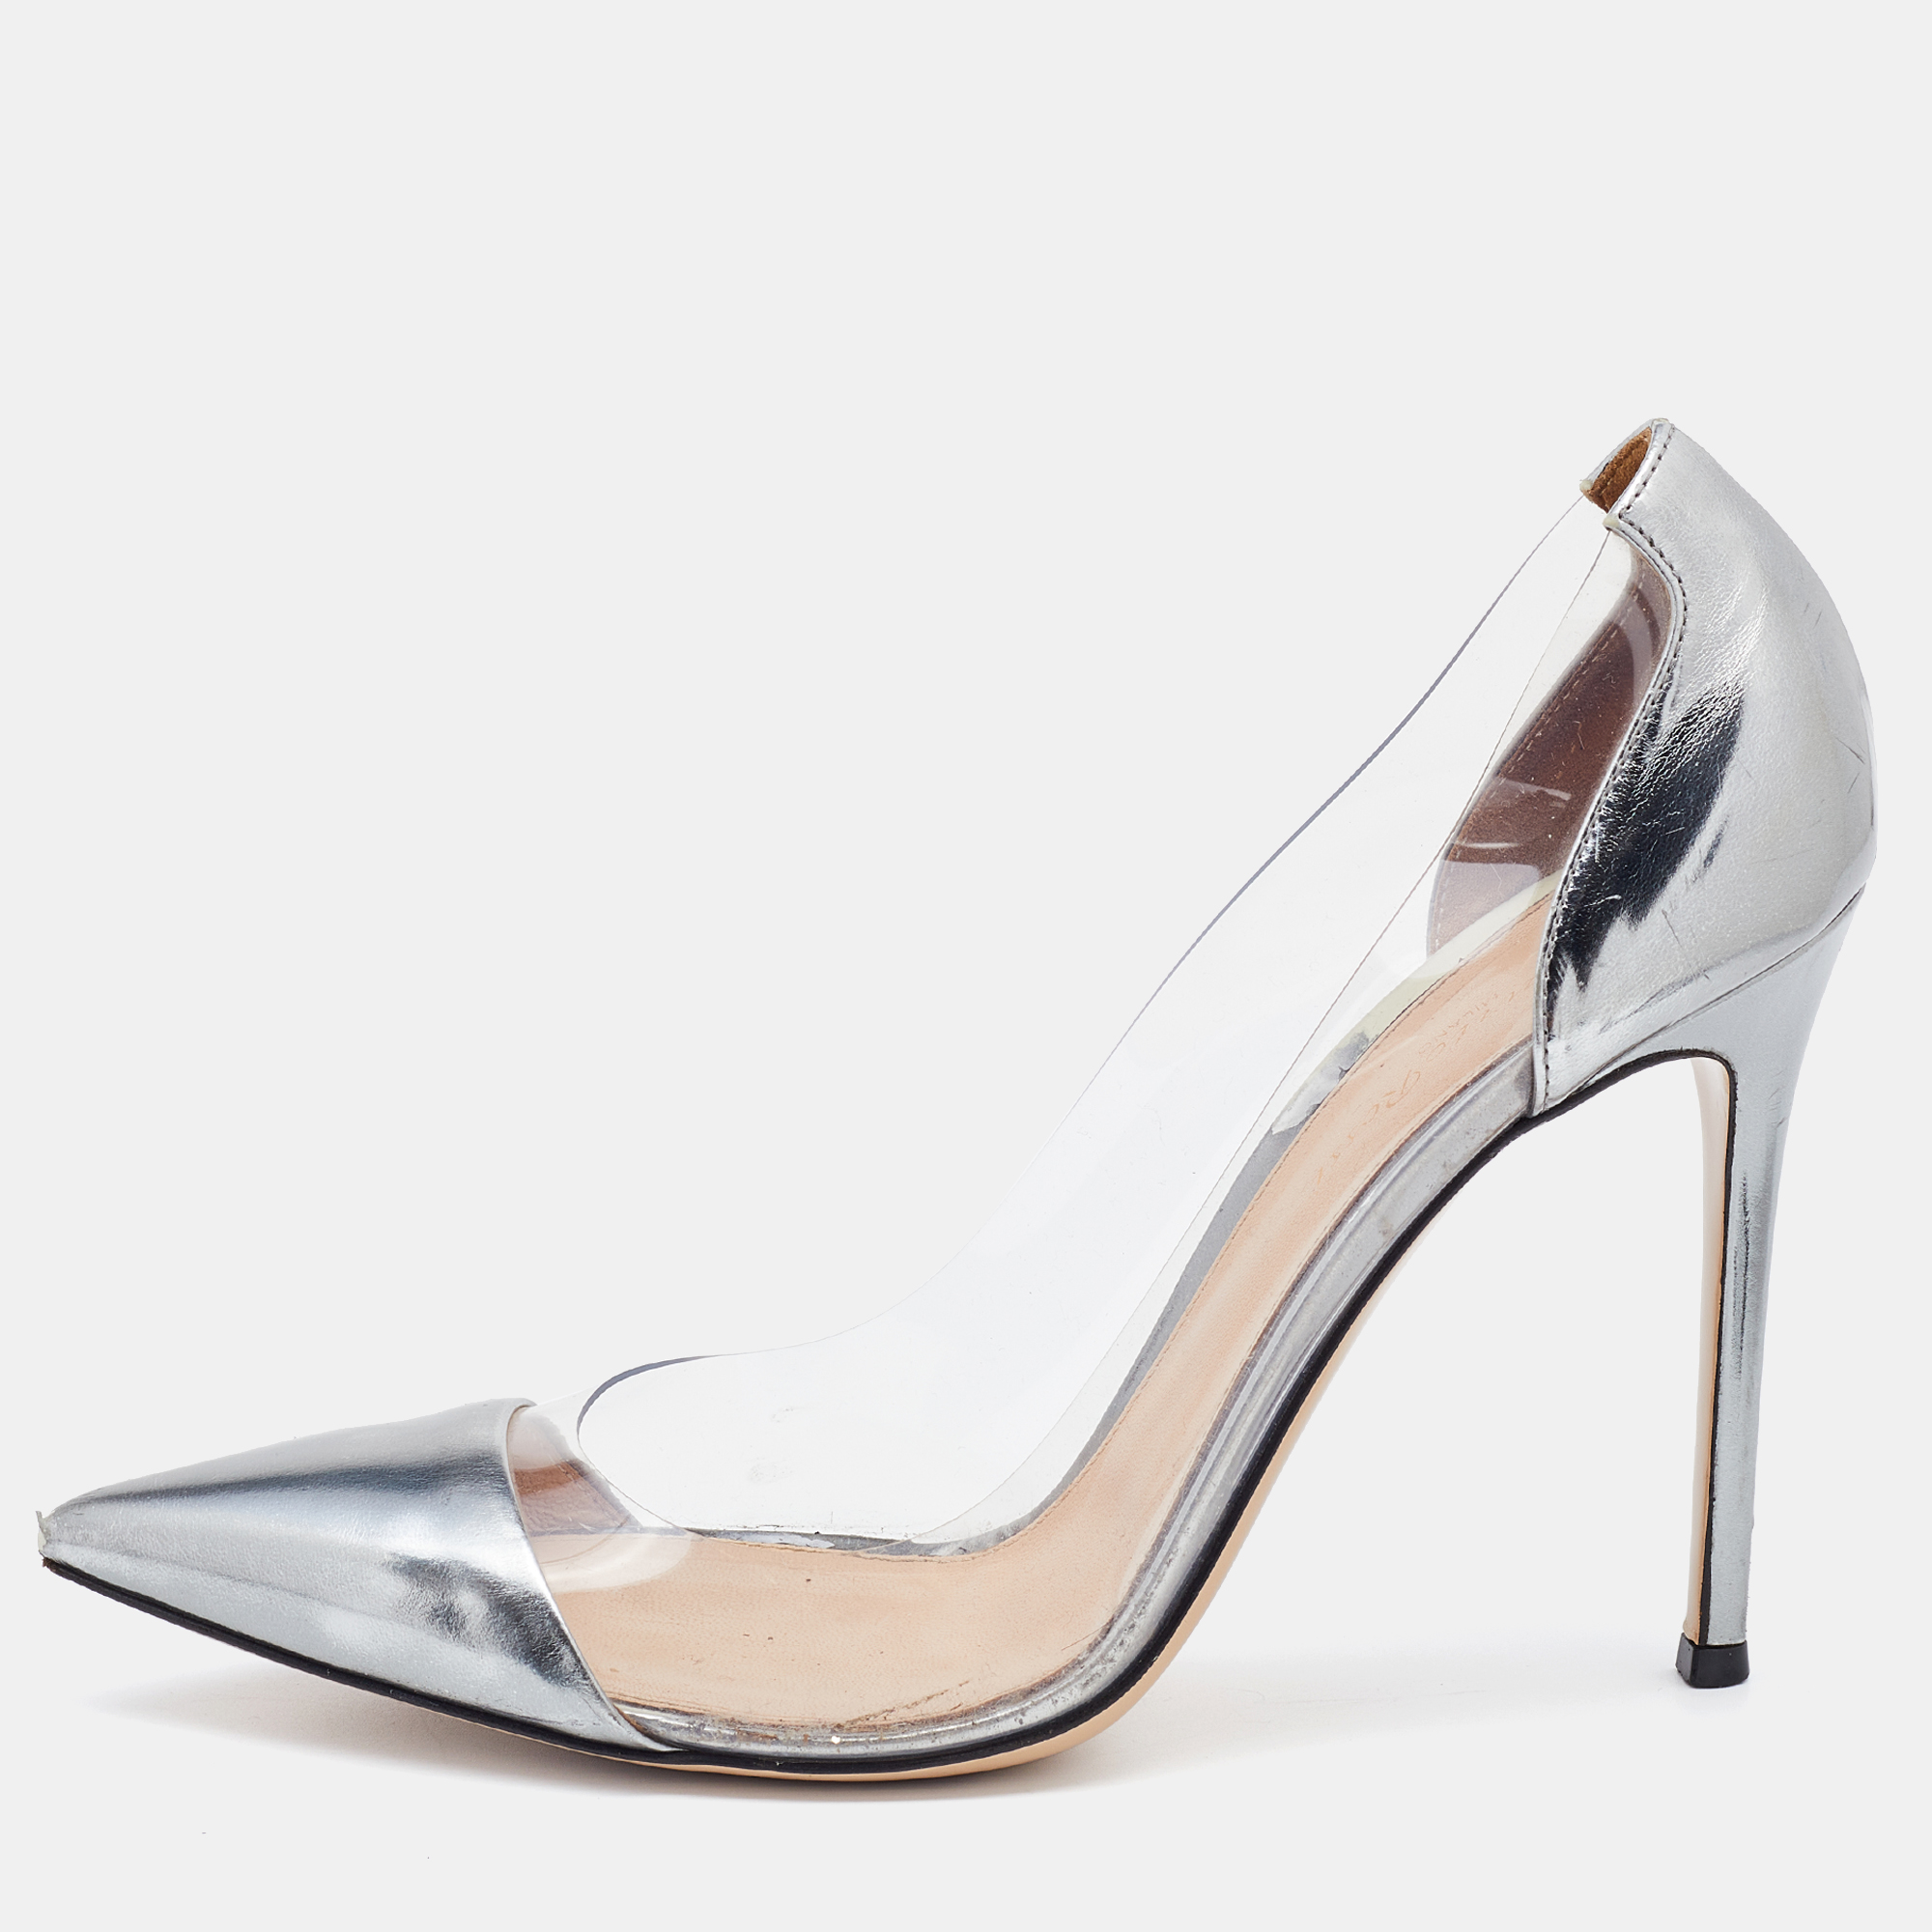 Pre-owned Gianvito Rossi Metallic Grey Leather And Pvc Plexi Pointed Toe Pumps Size 41